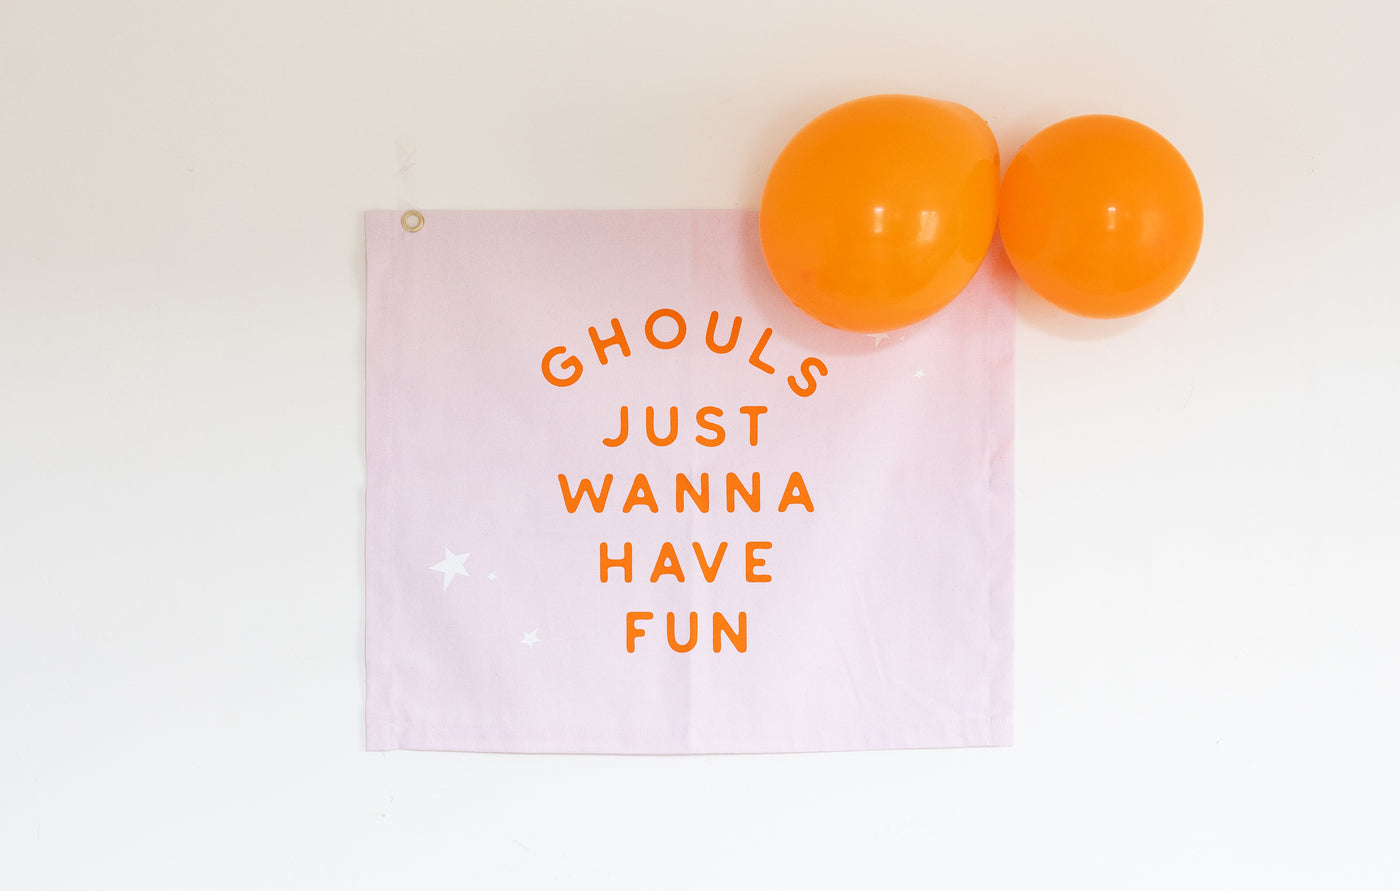 Ghoul Gang "Ghouls Just Wanna Have Fun" Canvas Banner